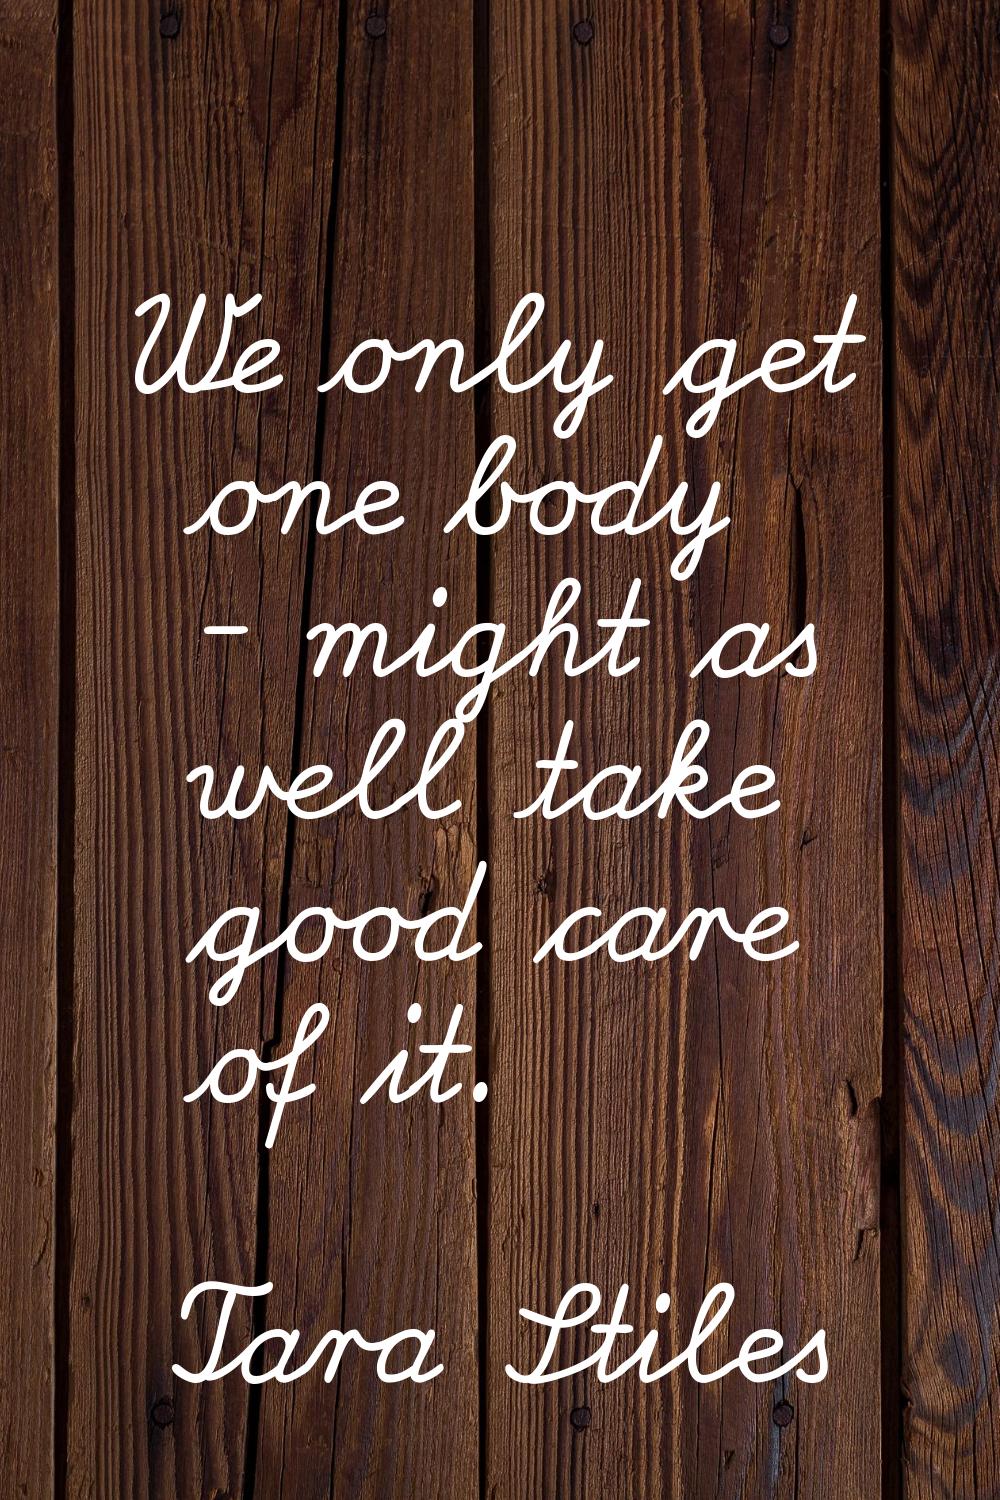 We only get one body - might as well take good care of it.